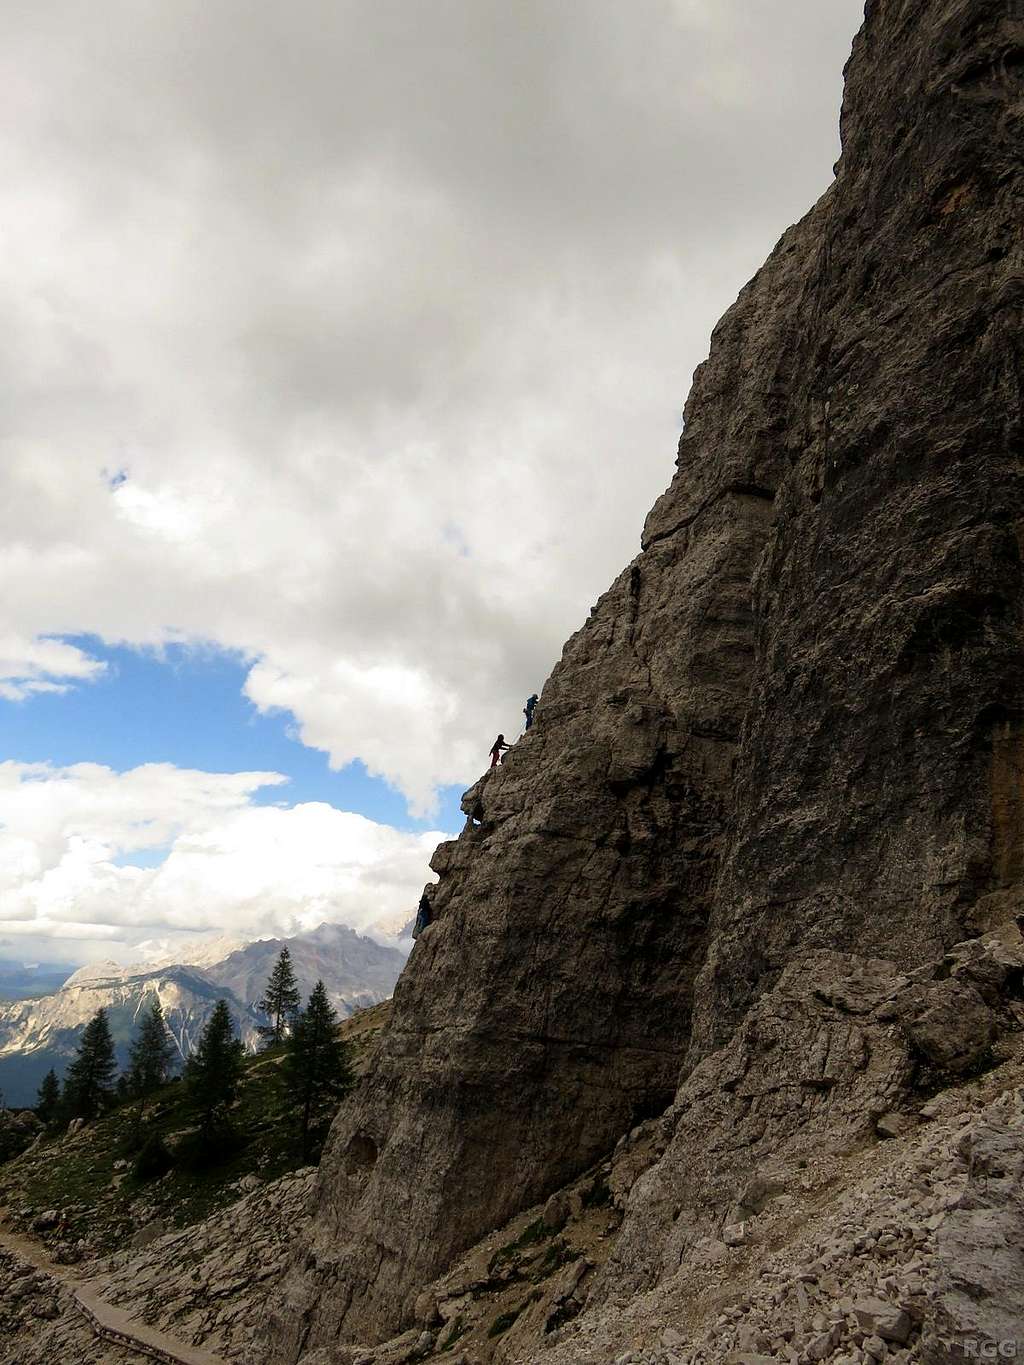 Despite the less than favorable skies, climbers are still heading up Torre Lusy